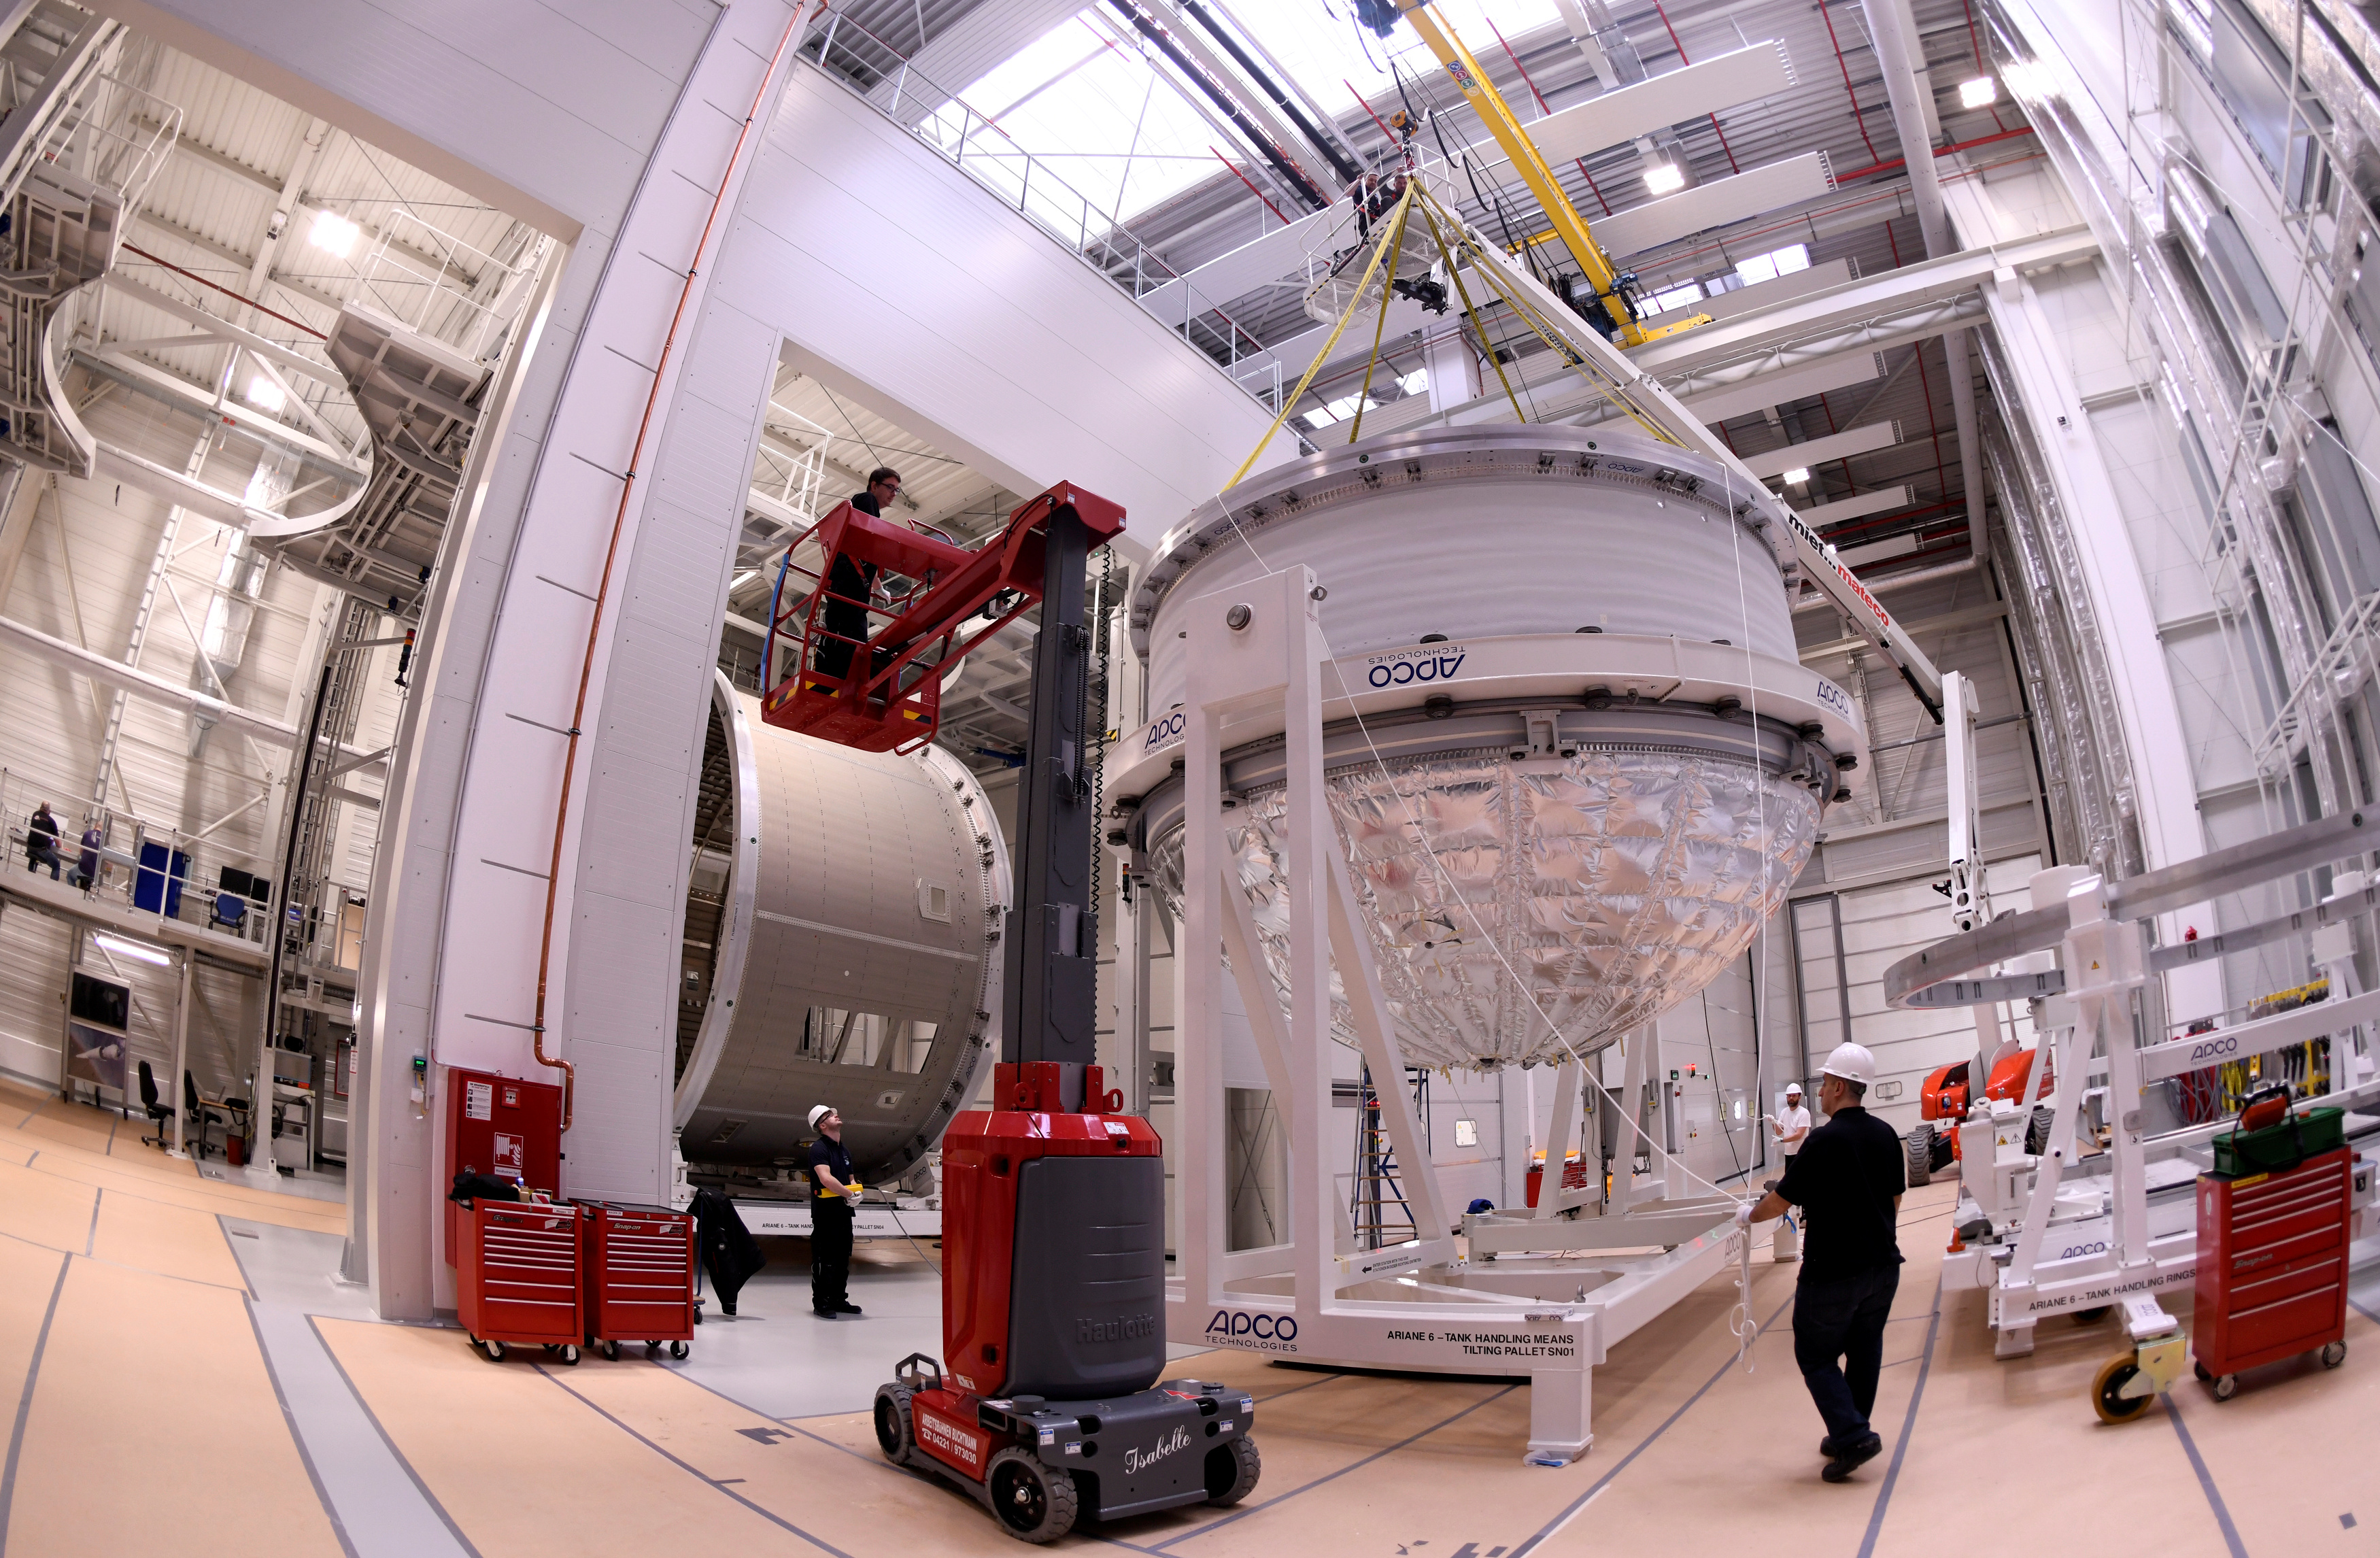 Employees of Ariane Group work in a production line of Ariane 6, Europe's next-generation space rocket, in Bremen